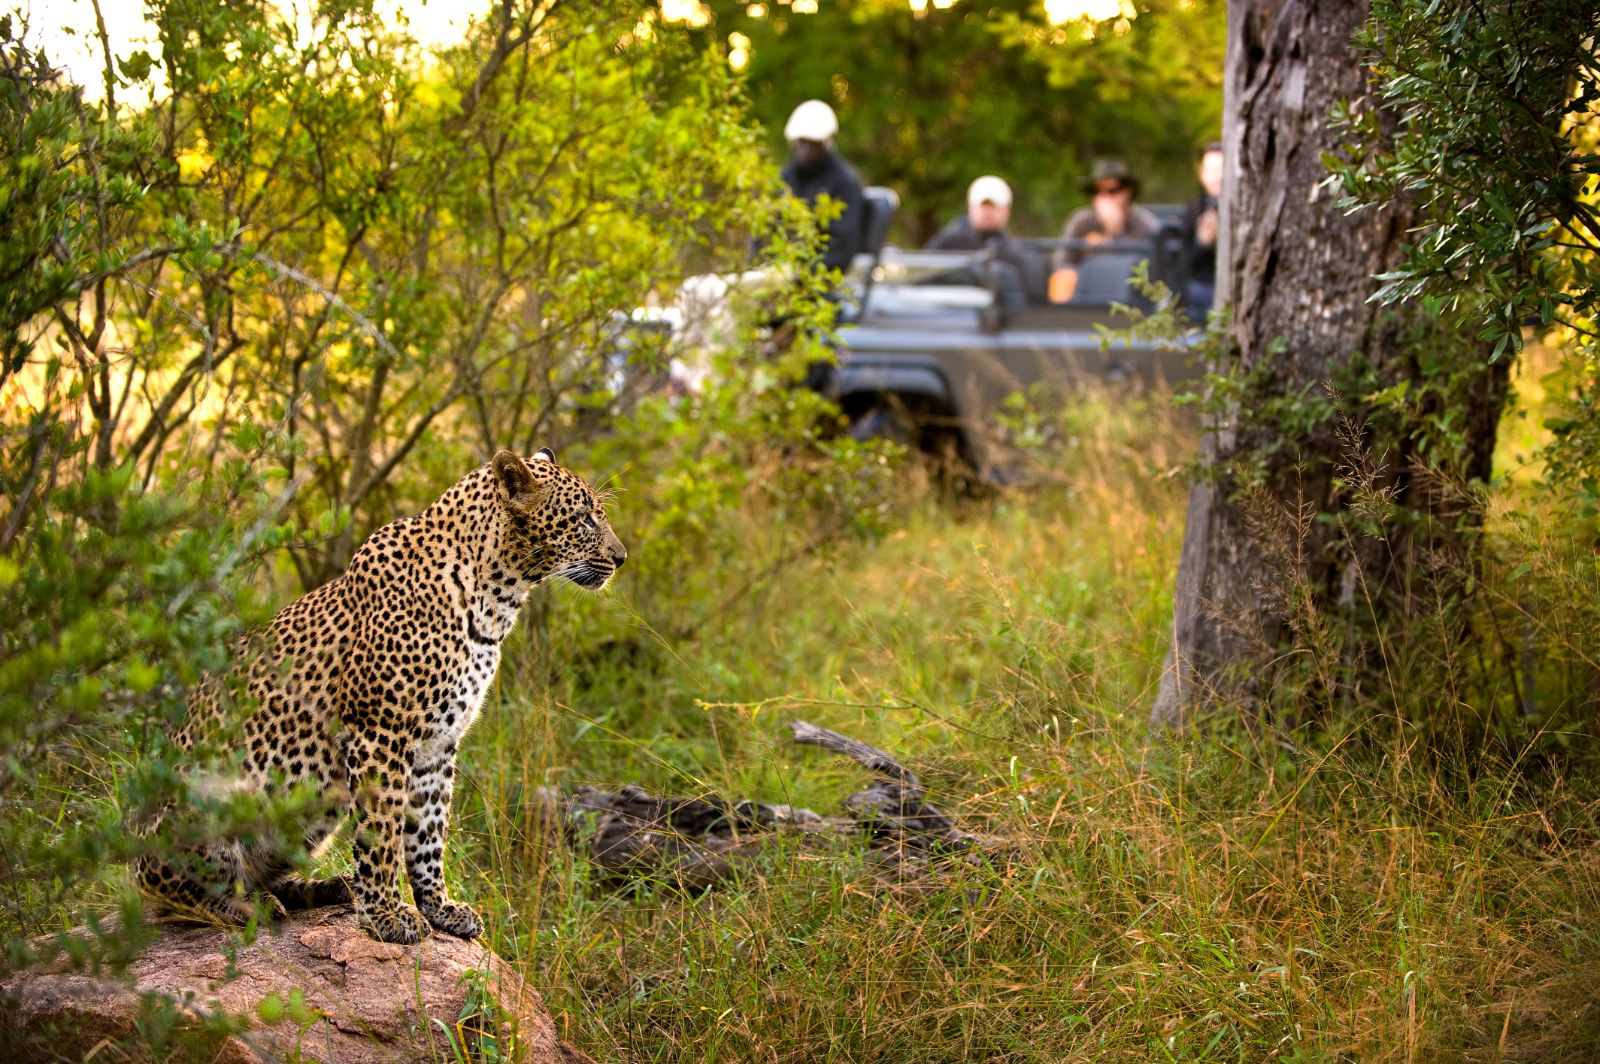 A cheetah spotted on the grounds of Fish Eagle Villa at Lion Sands in the Kruger National Park of South Africa